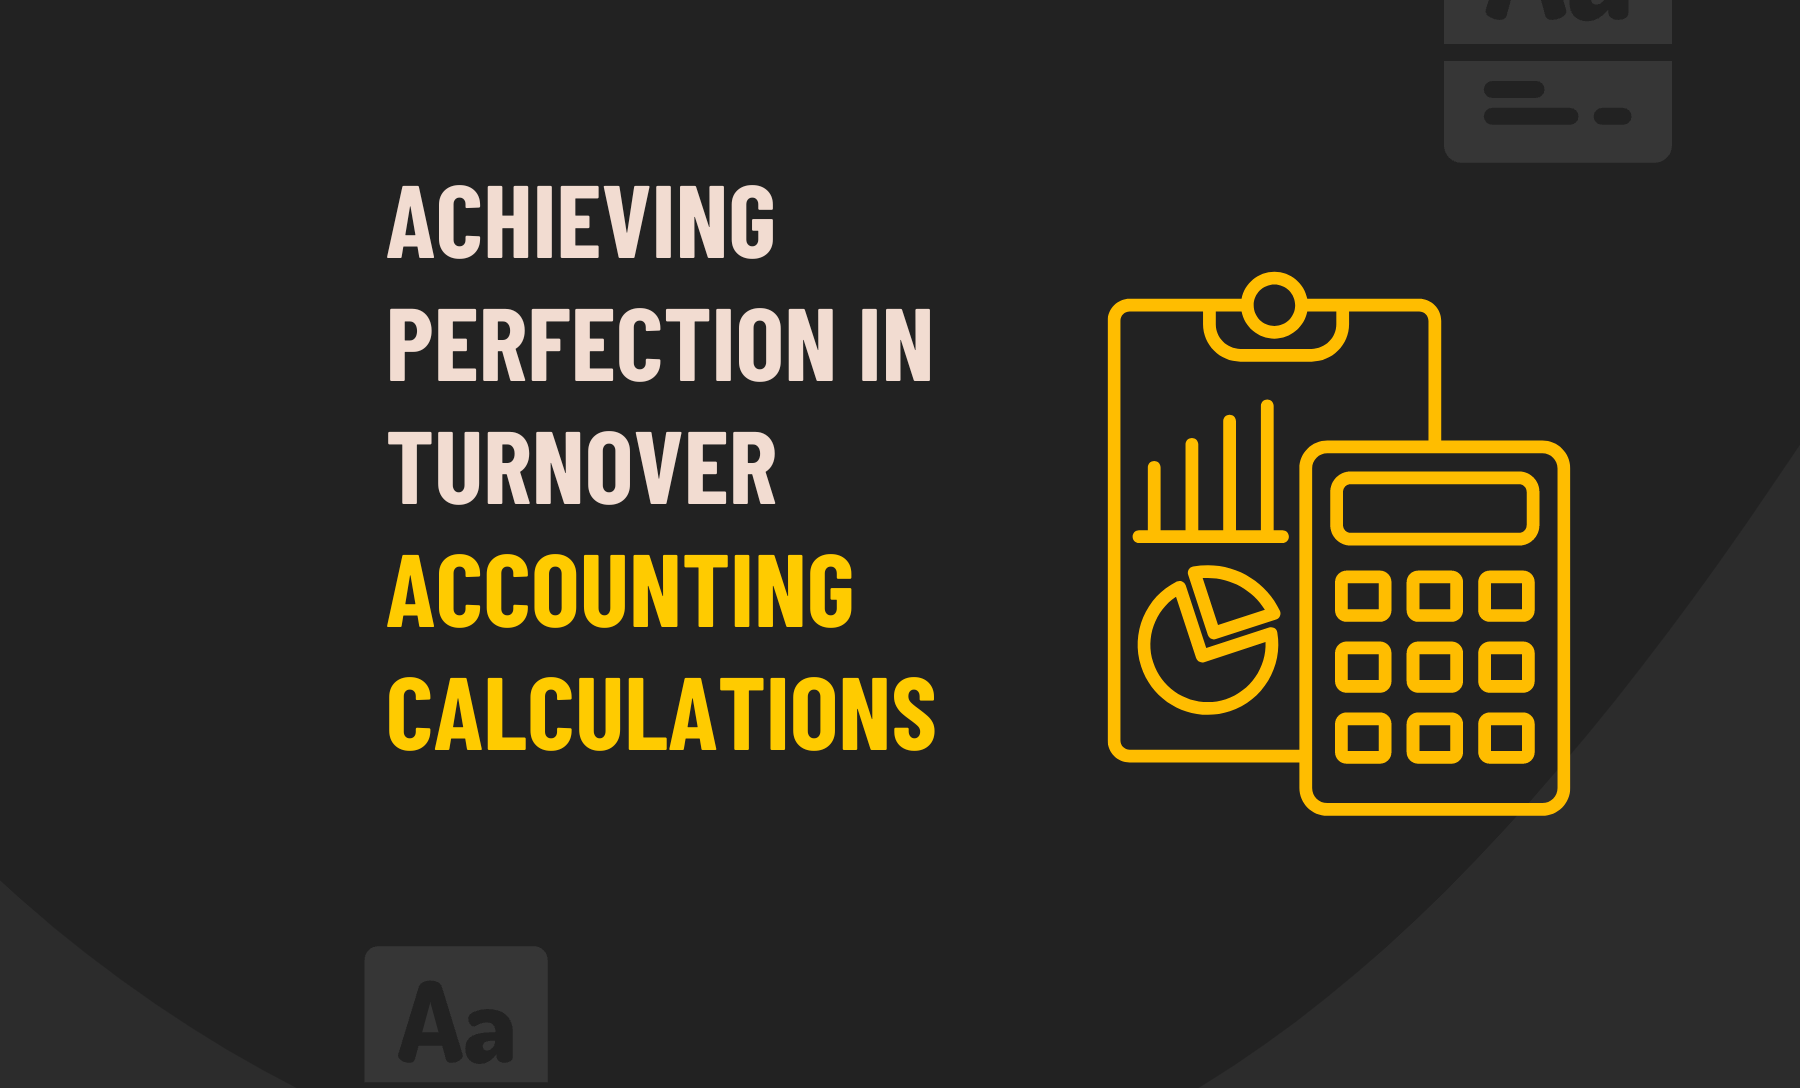 Turnover Accounting Calculations